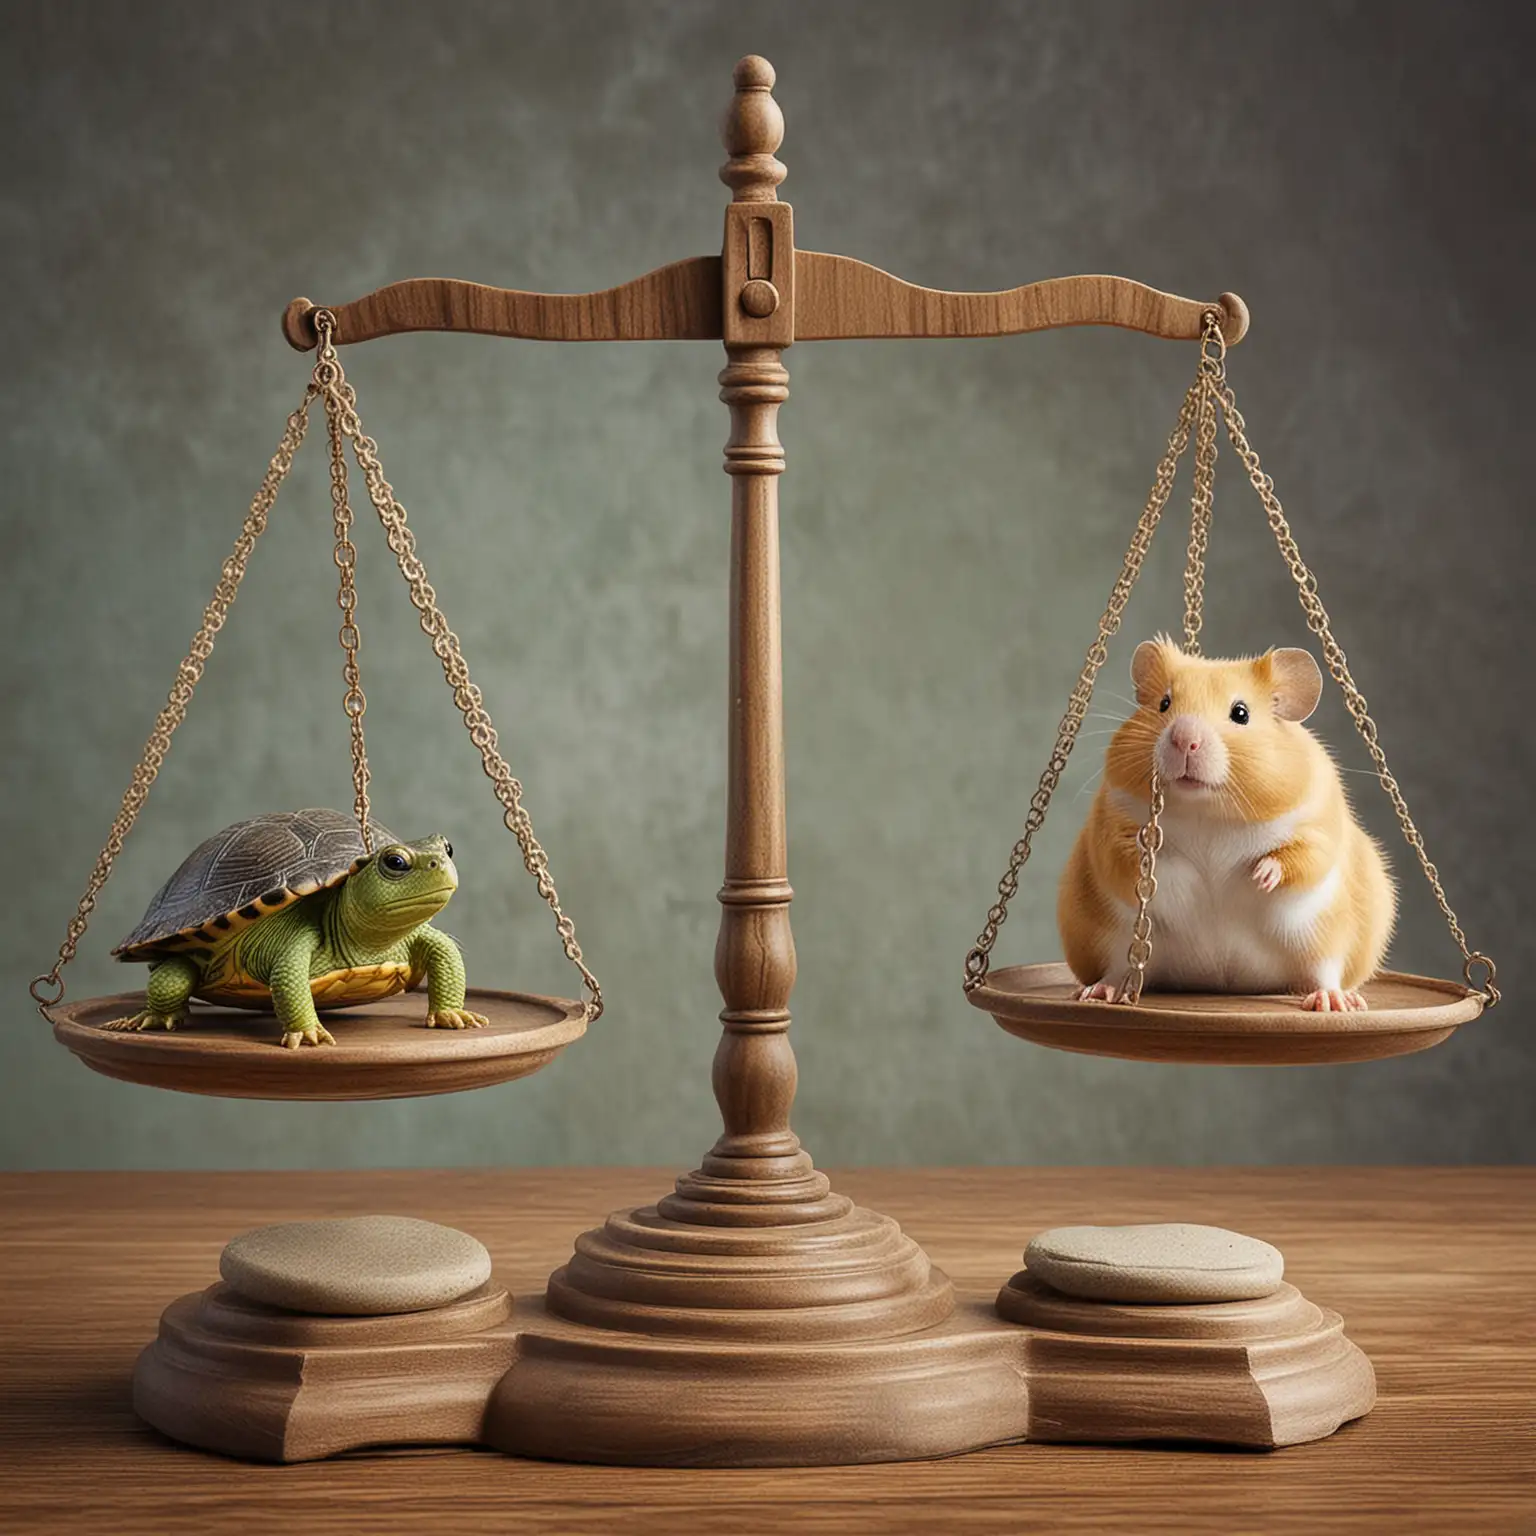 Scales of justice with turtle on one side and hamster on the other 